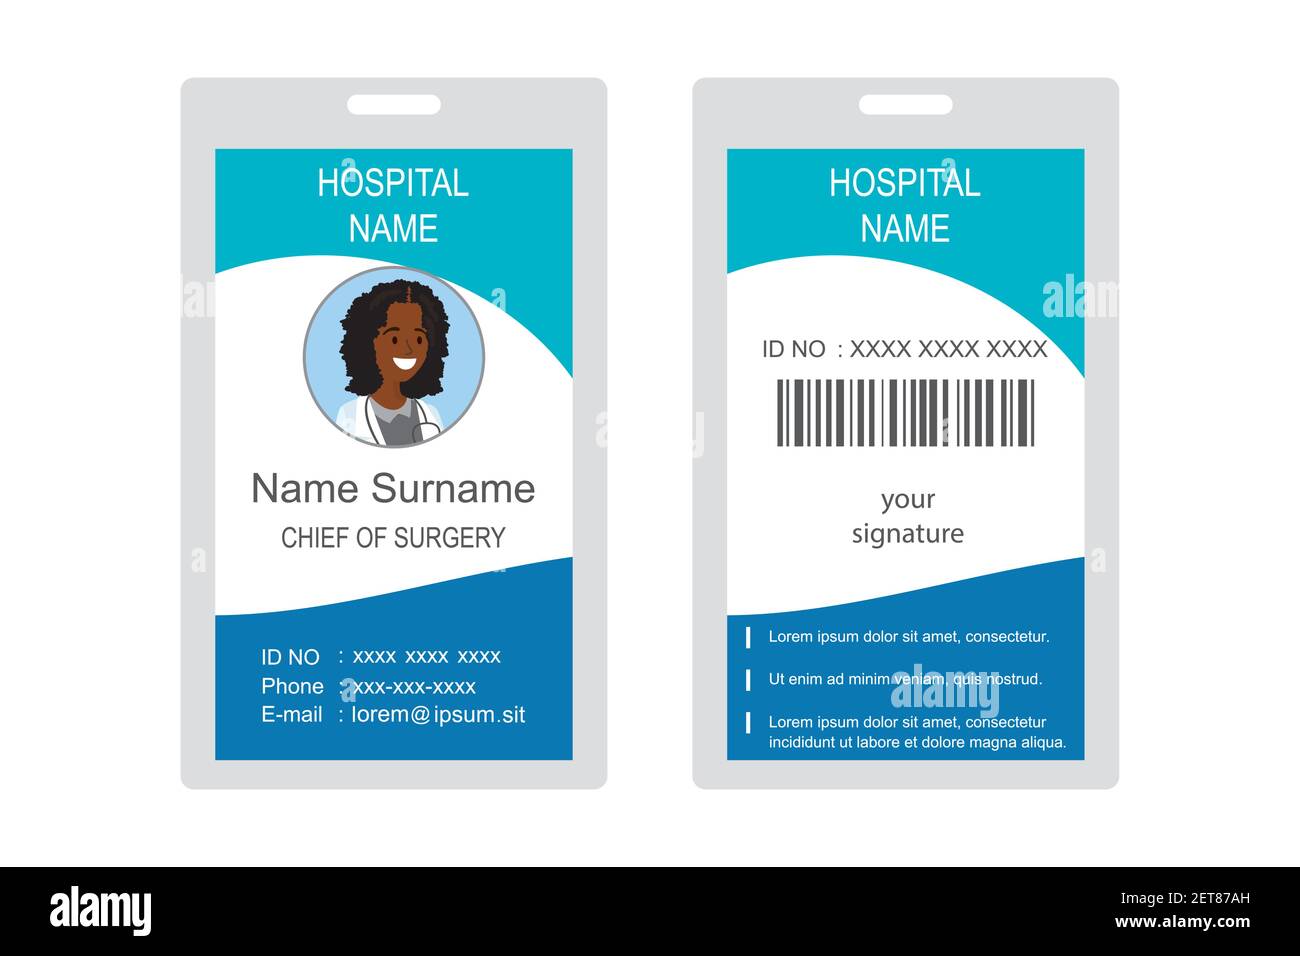 Plastic and Laminated Medical Badge or id card, front and back With Regard To Hospital Id Card Template